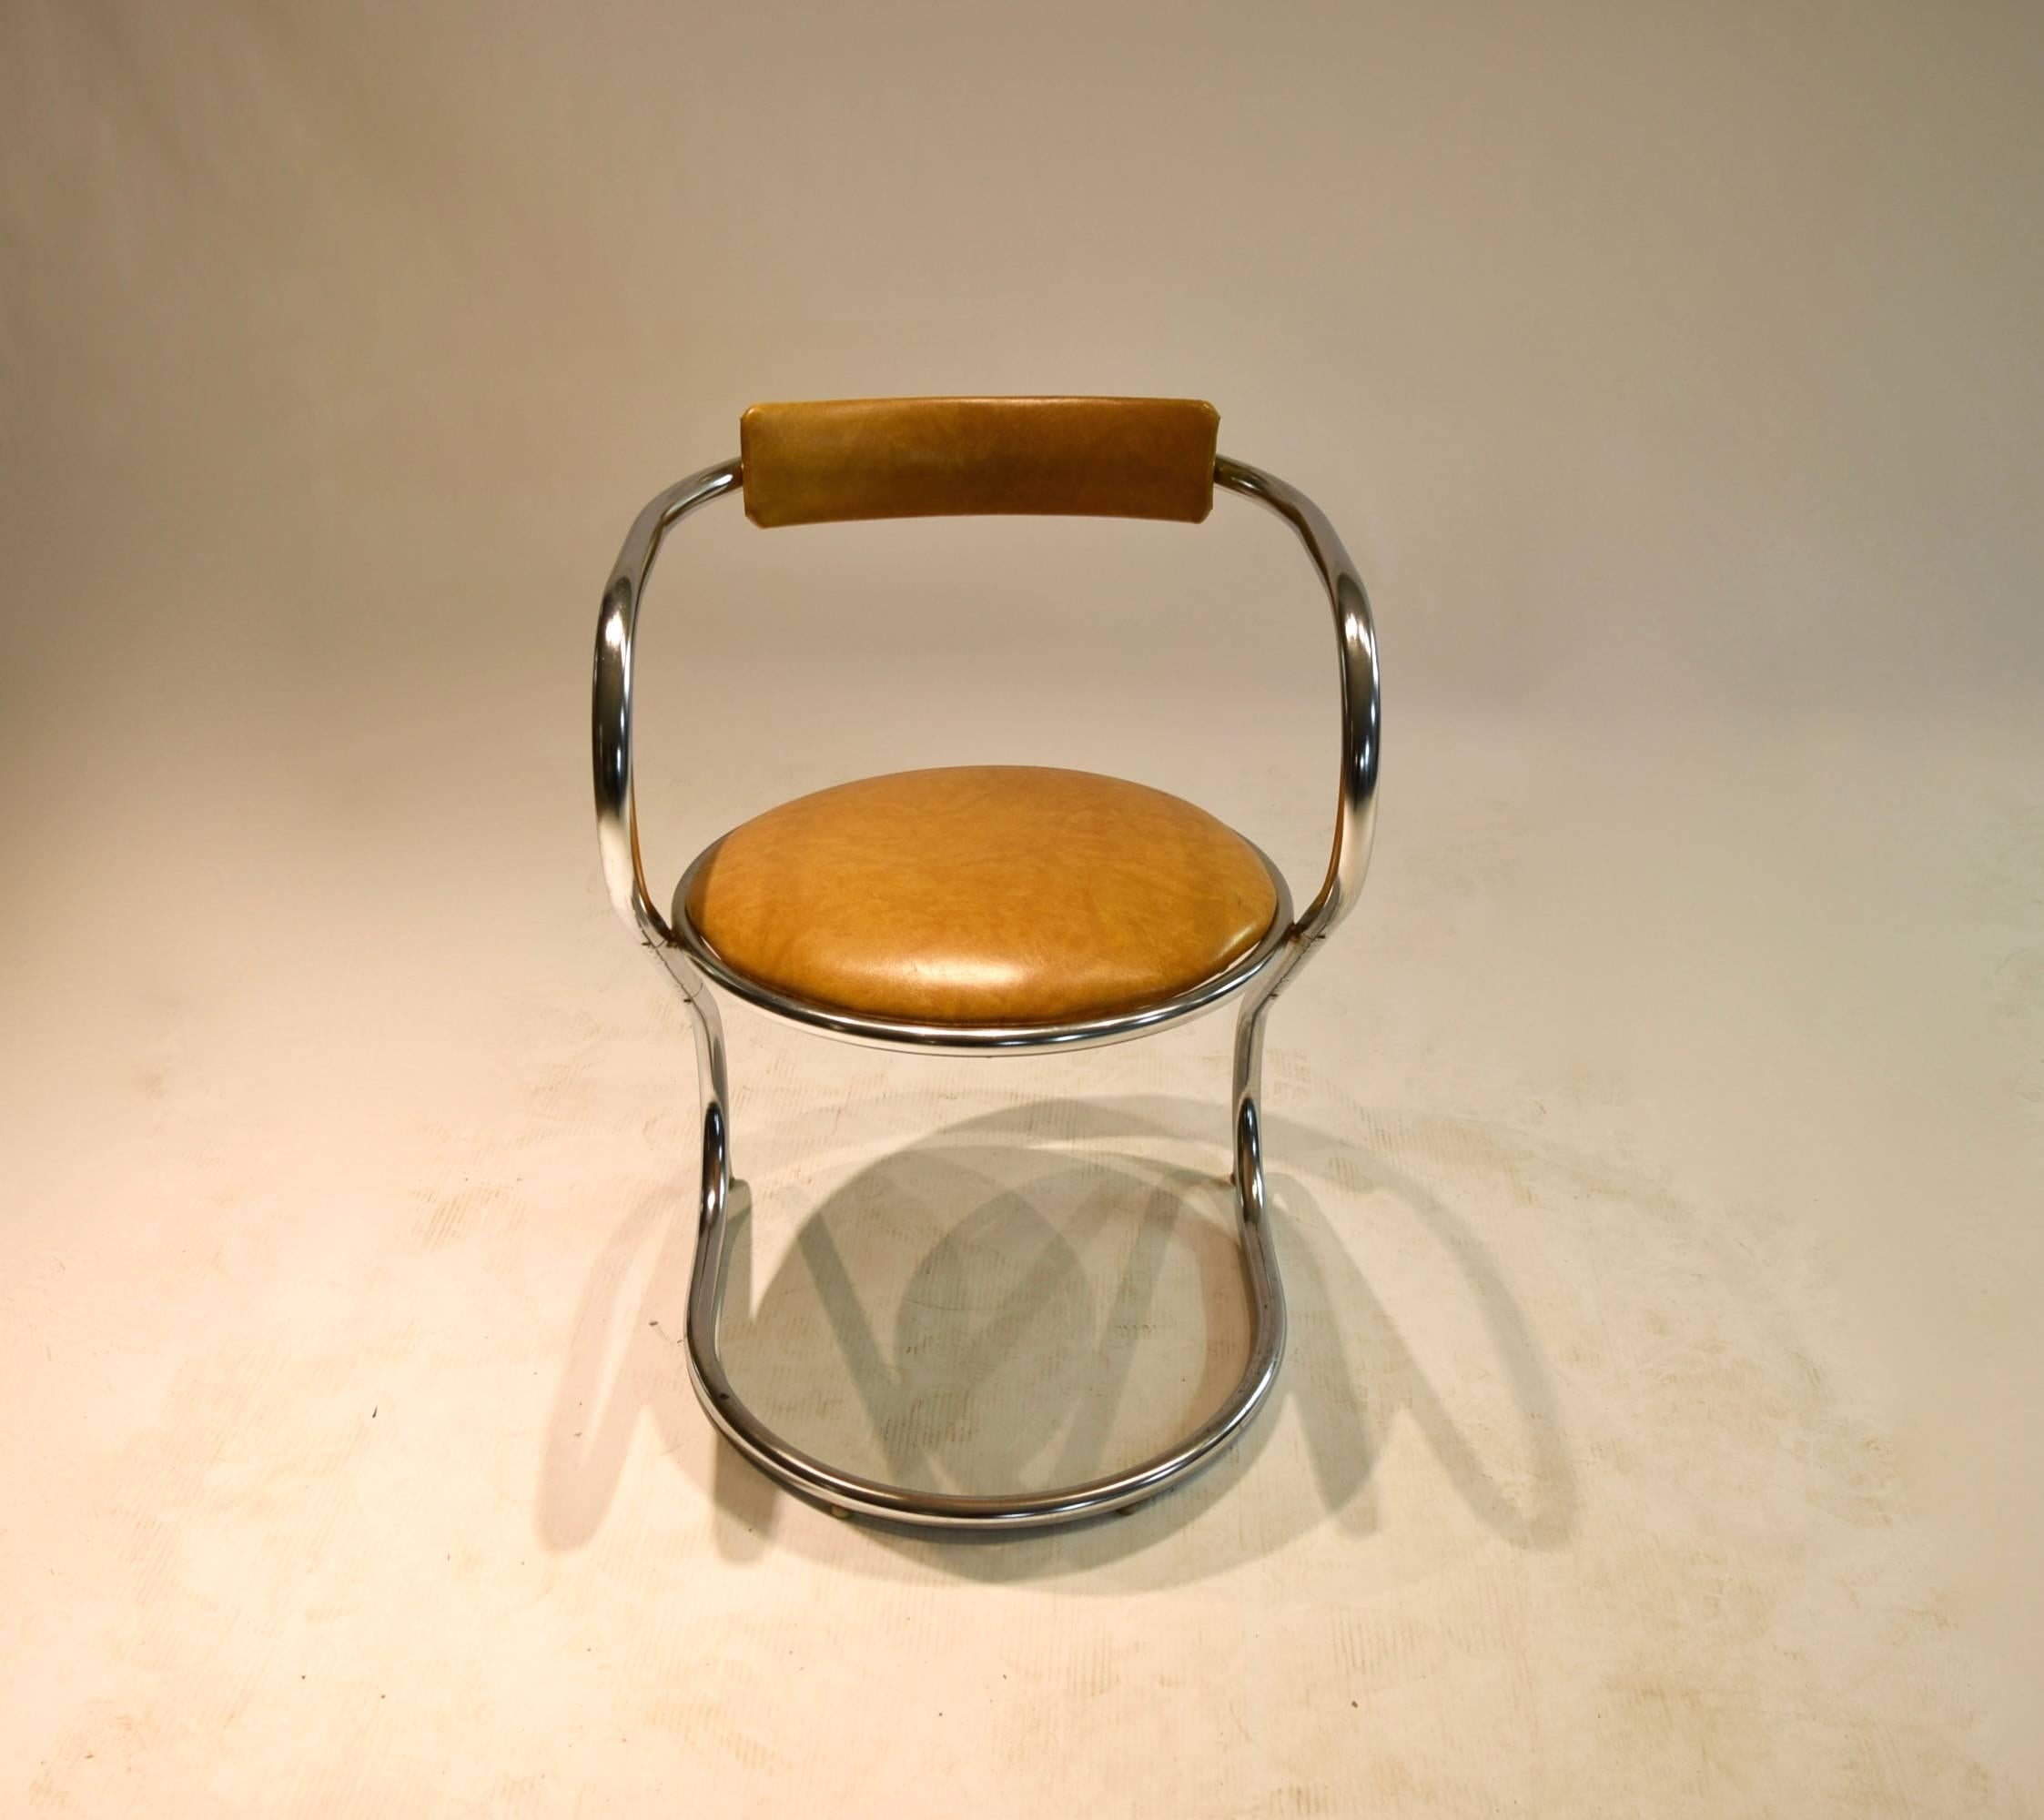 Tubular chromed metal desk or side chair with upholstered seat and back rest in a tan colored leatherette. 